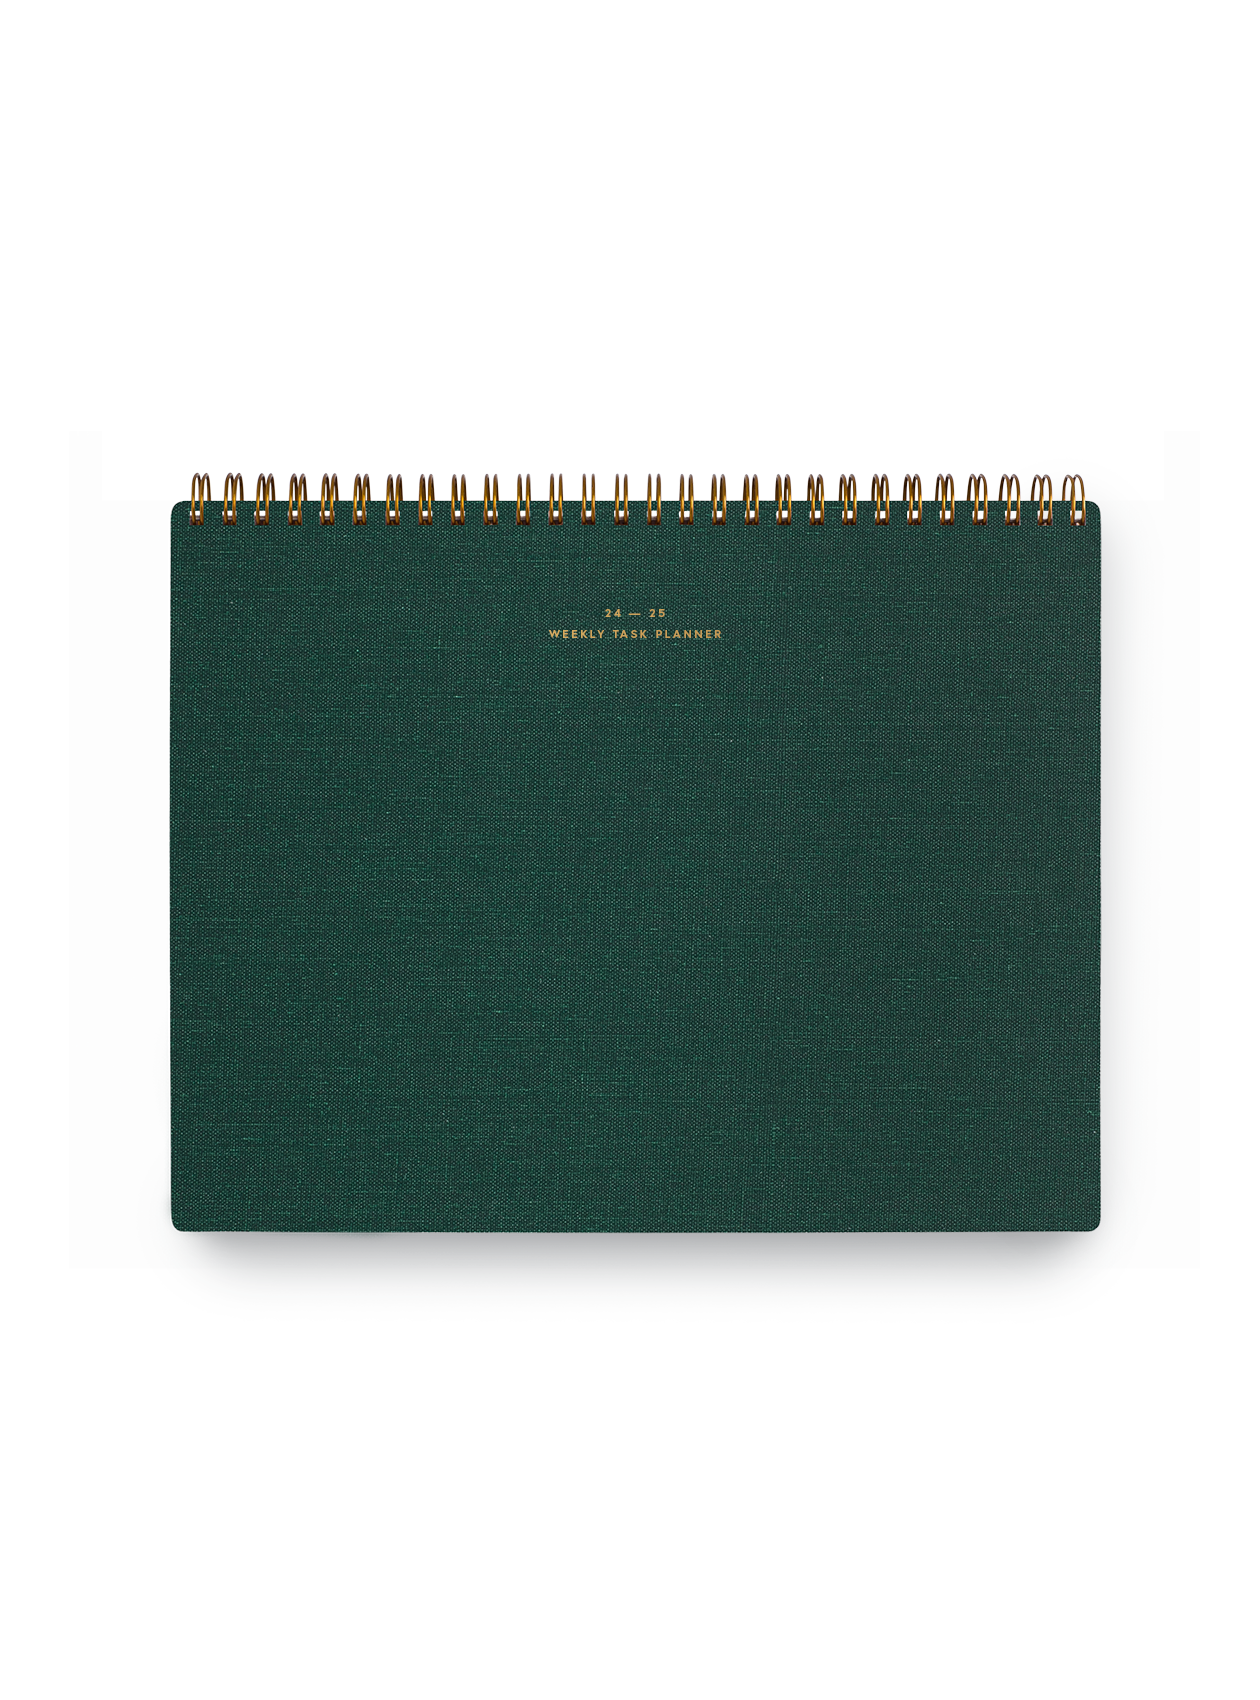 Appointed top-bound 24-25 Weekly Task Planner with brass wire-o binding and gold foil details || Hunter Green